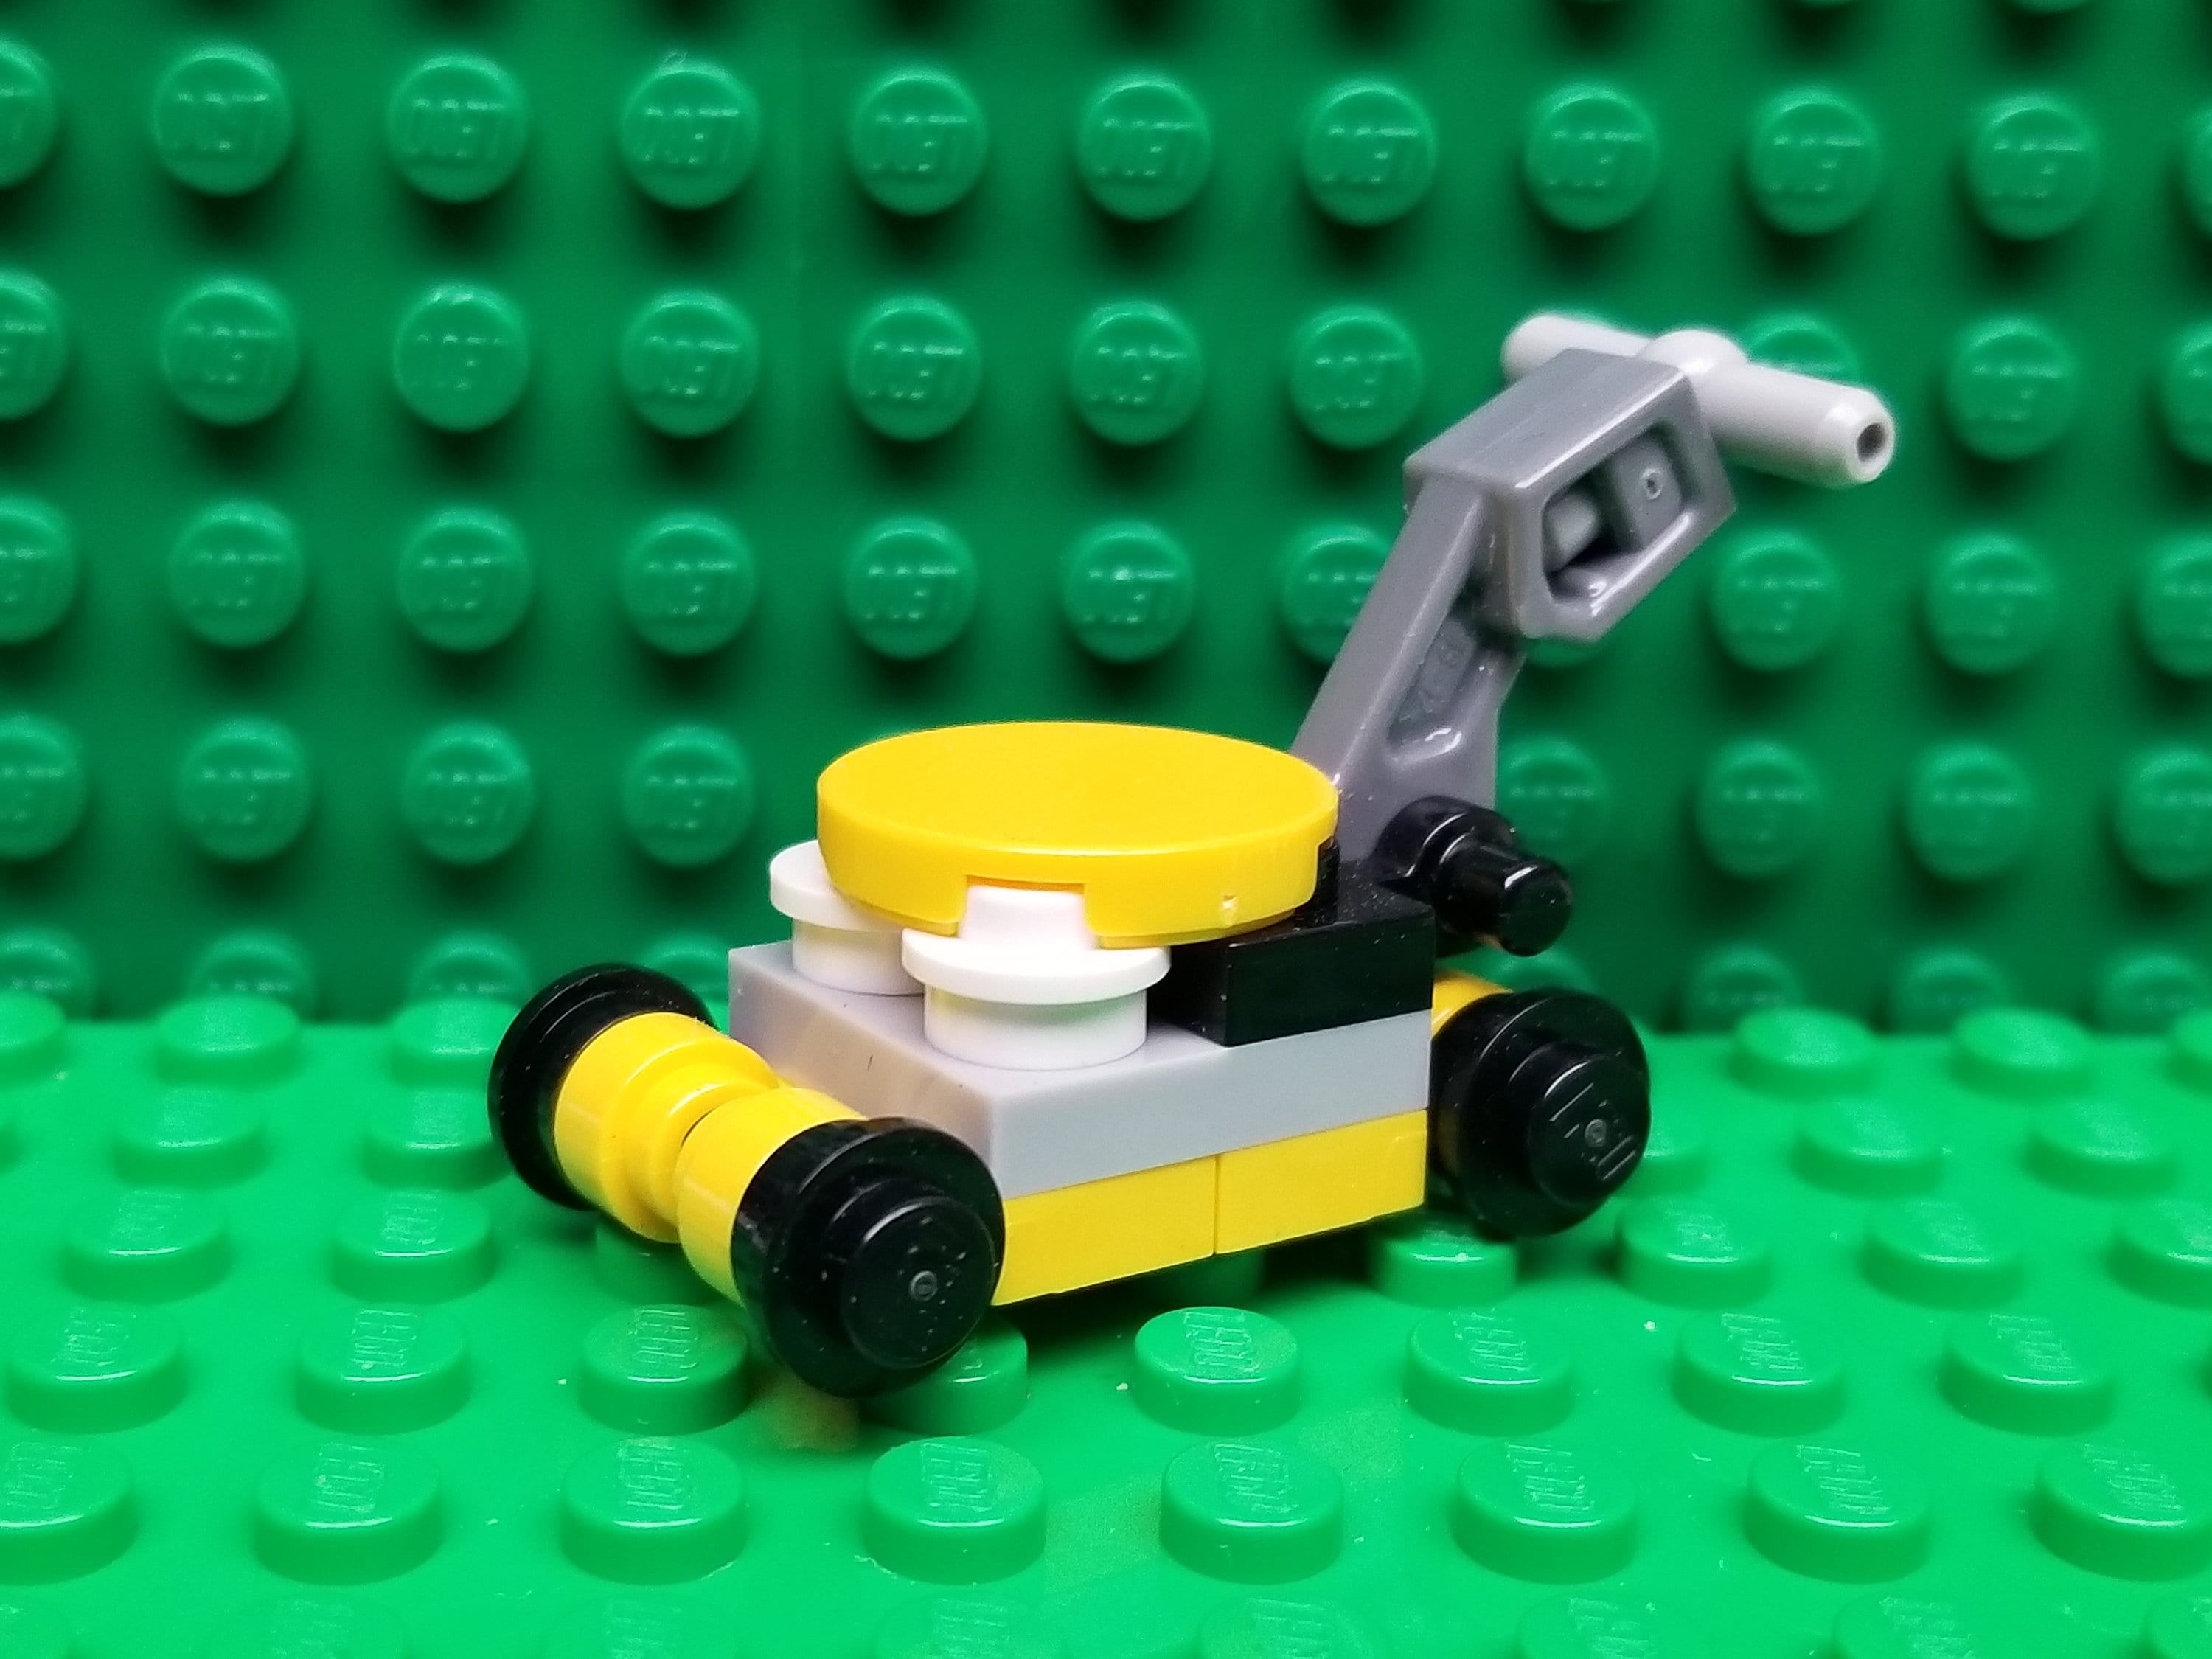 LEGO IDEAS - Lawn Mower and Vacuum Cleaner